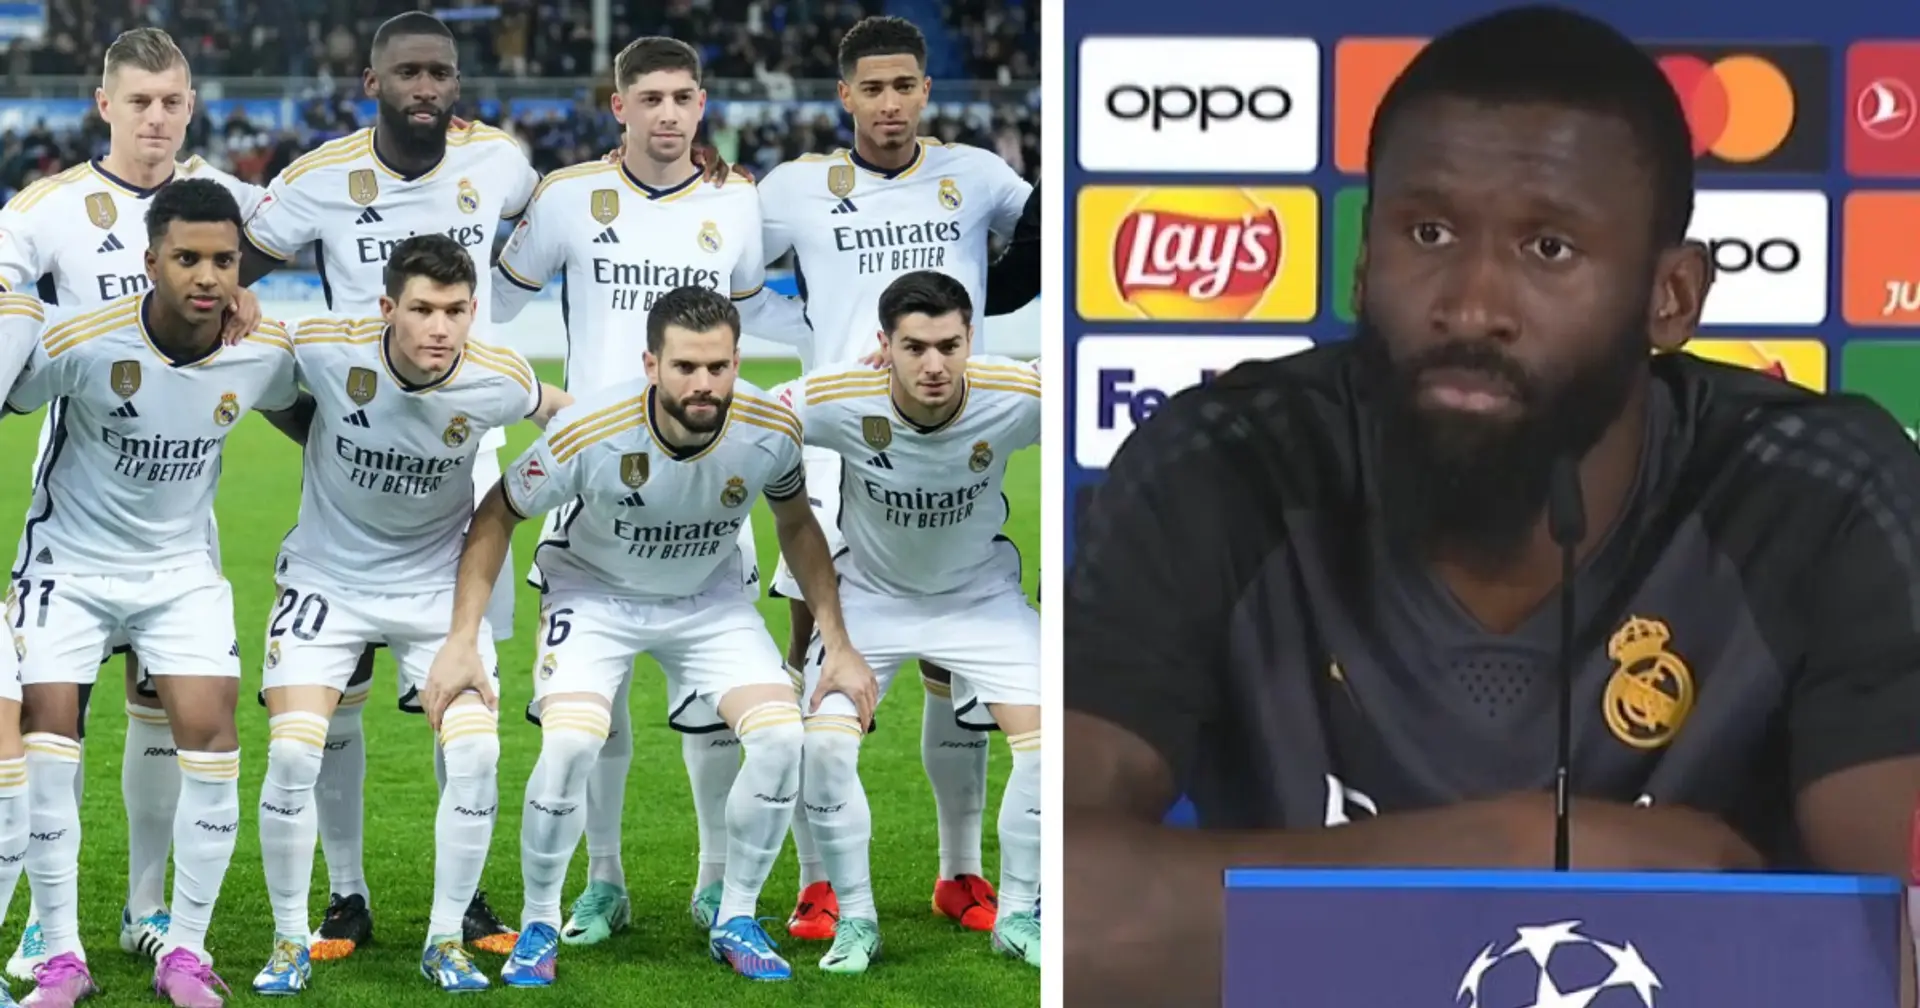 'I didn't know him that well': Rudiger names Real Madrid teammates who surprised him